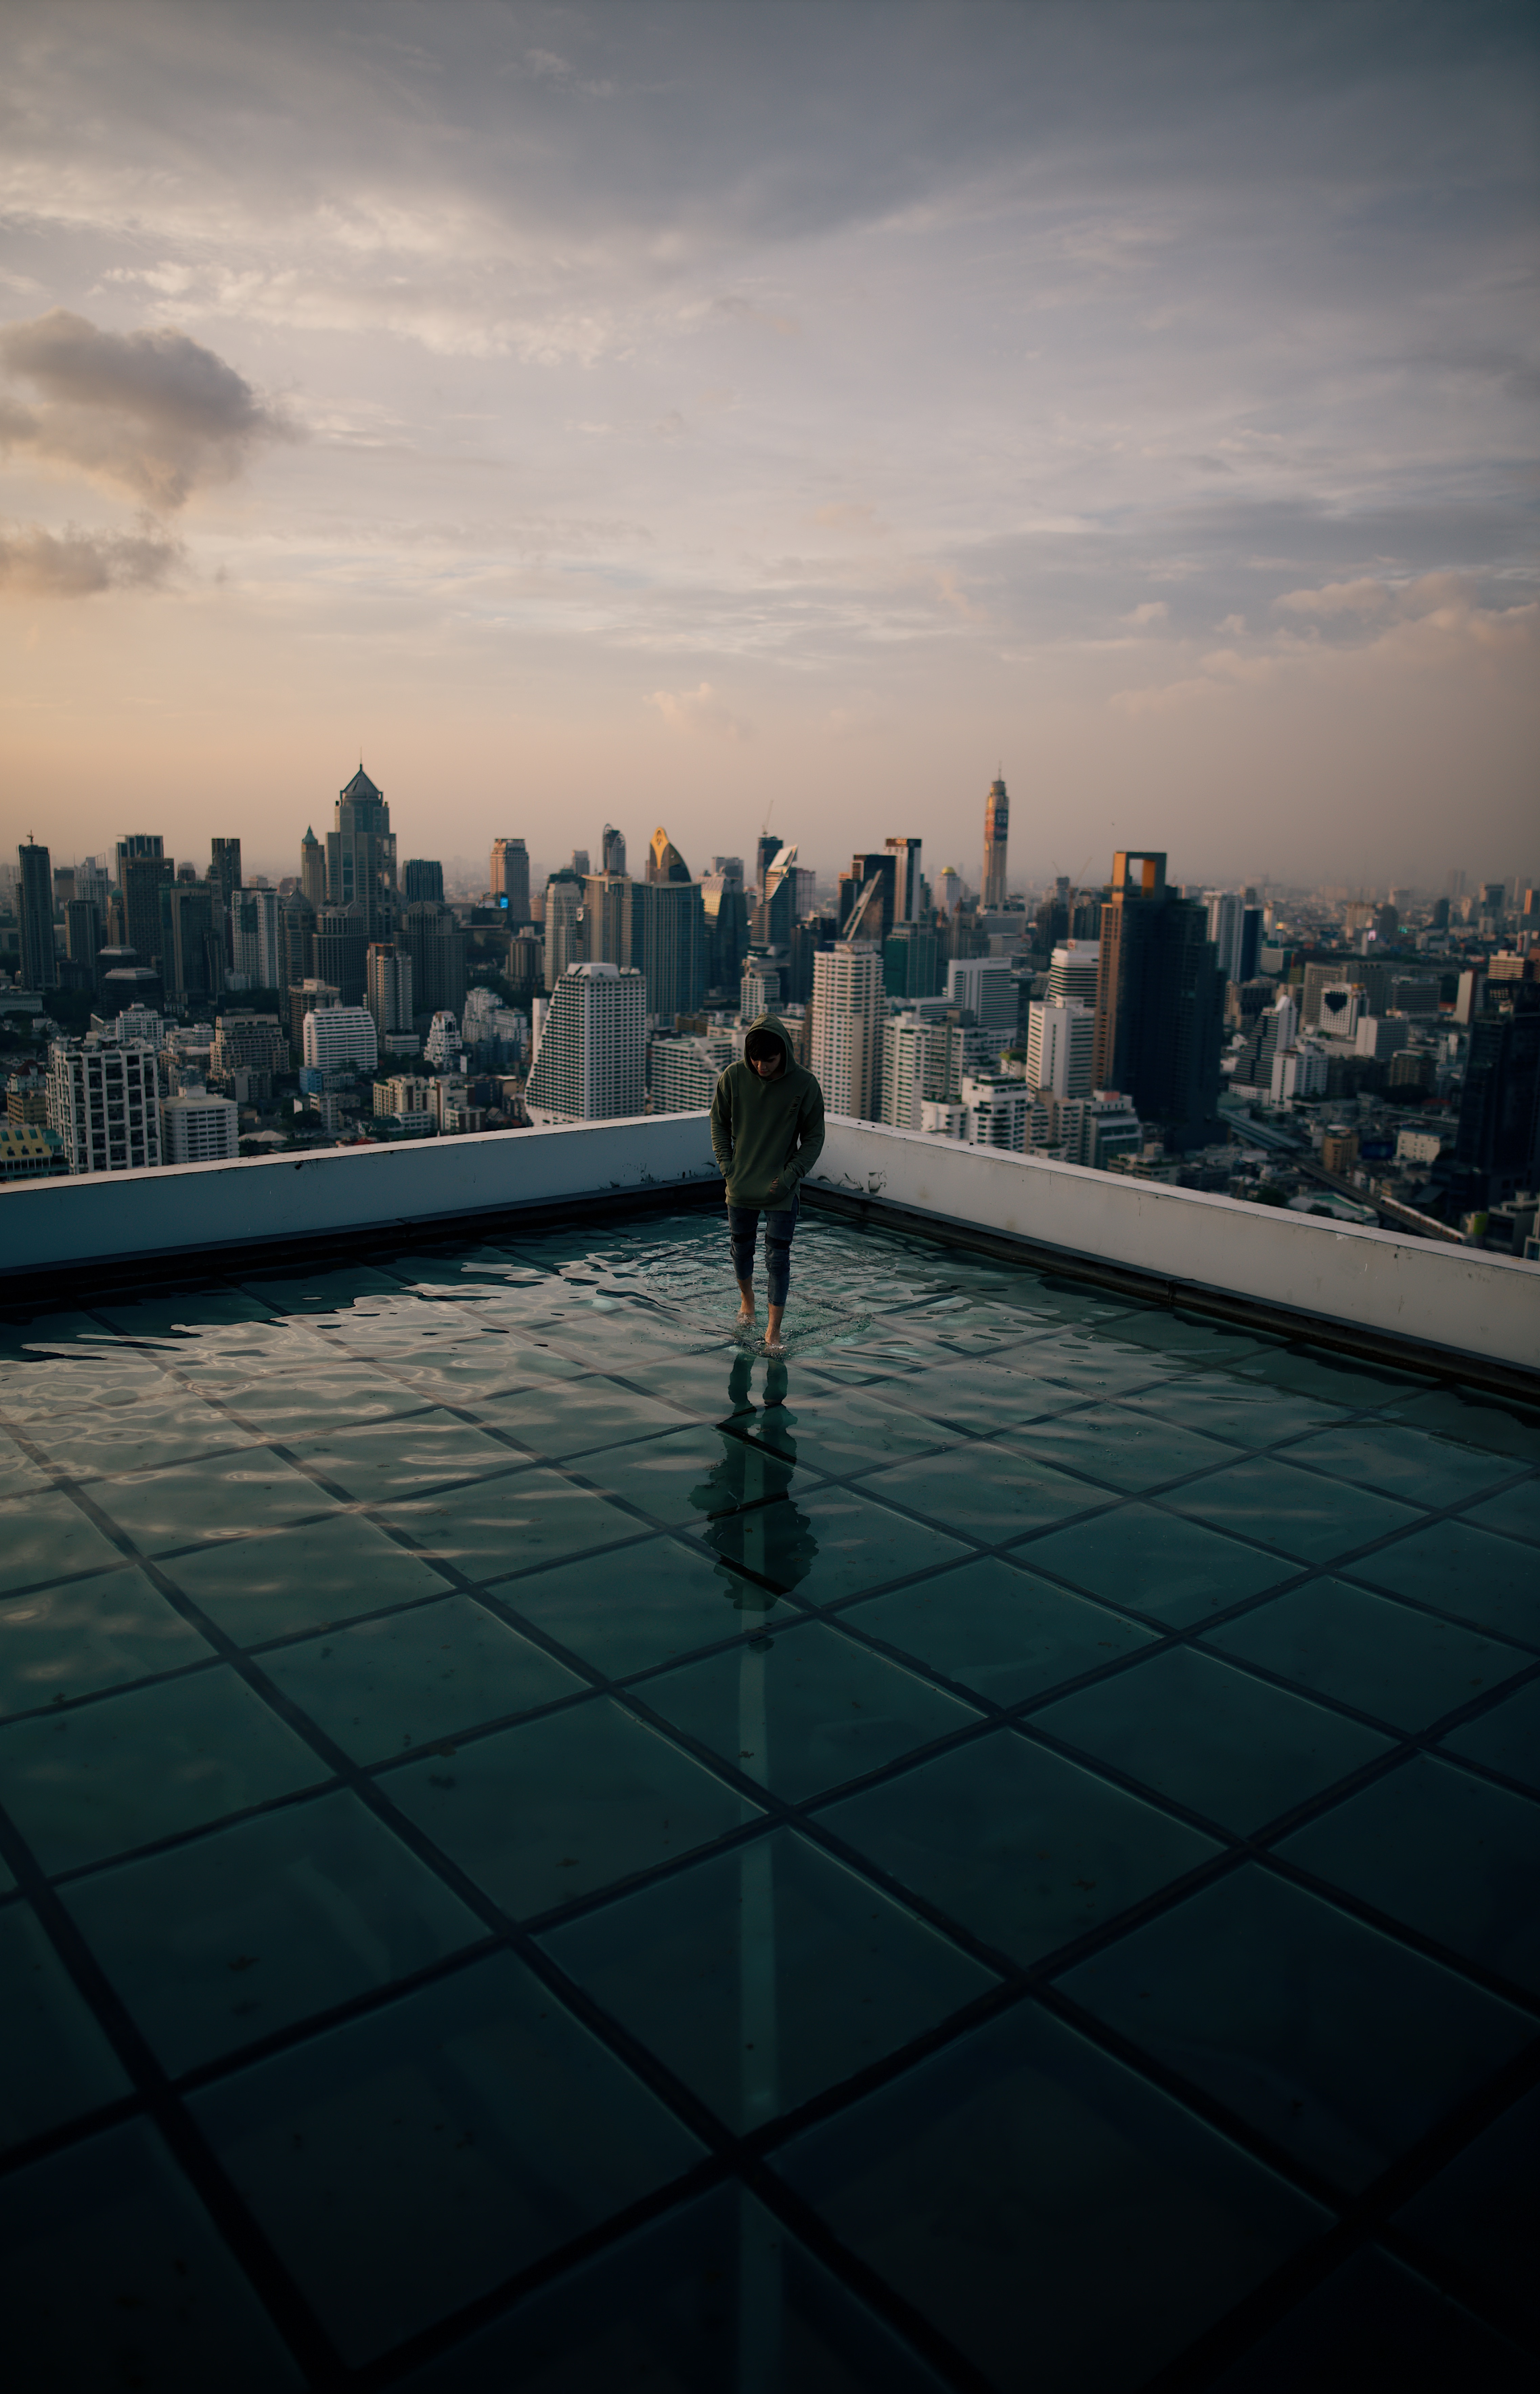 cities, wet, human, water, after the rain, city, horizon, person, roof